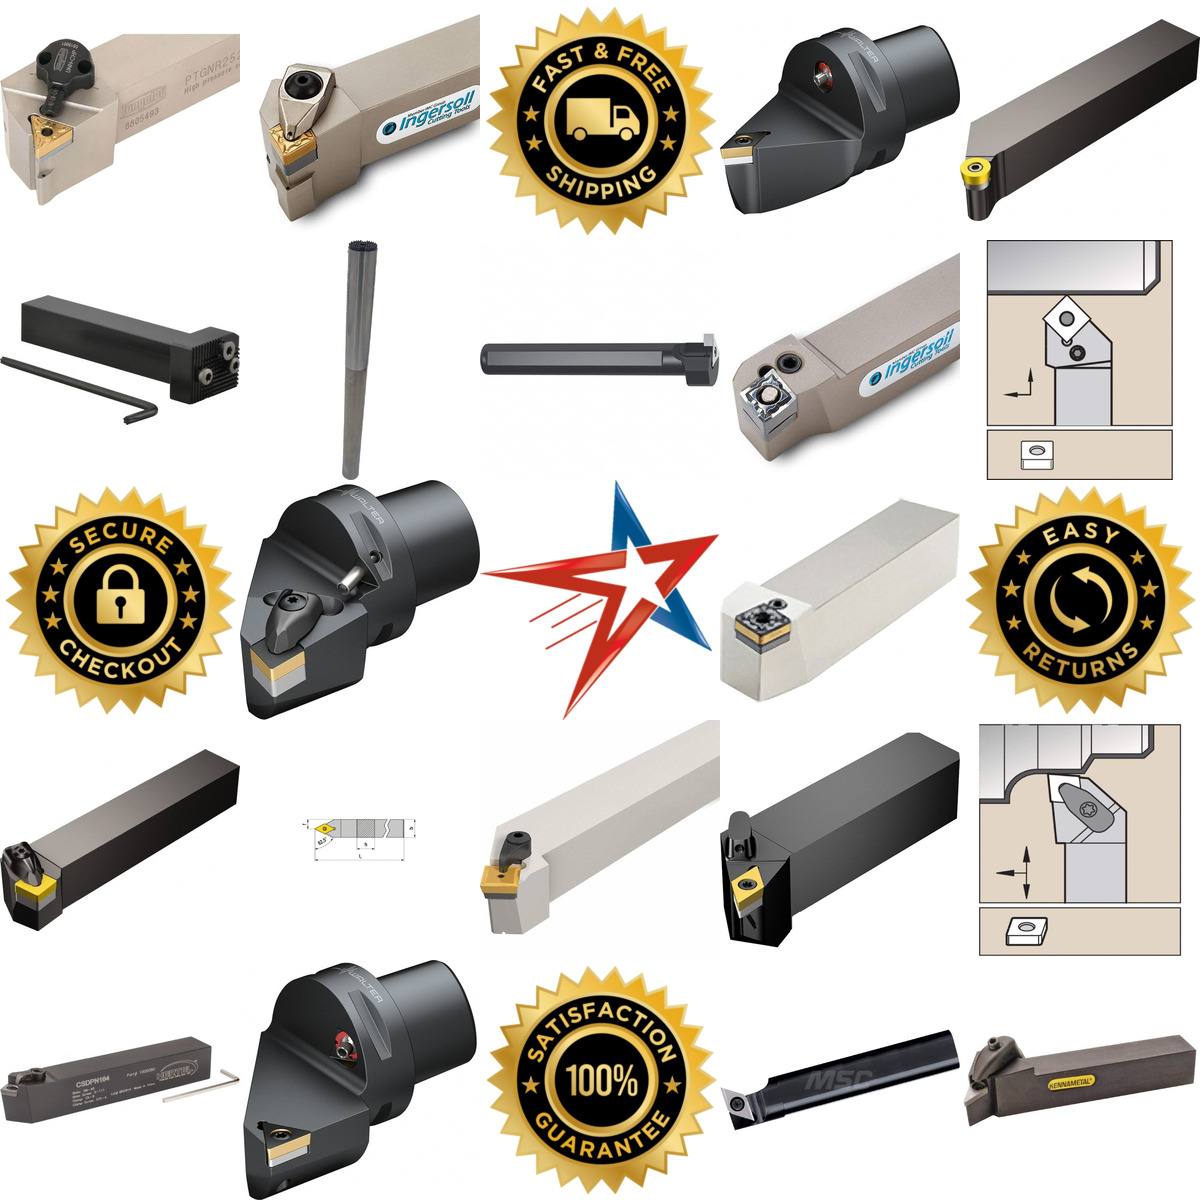 A selection of Indexable Turning Toolholders products on GoVets